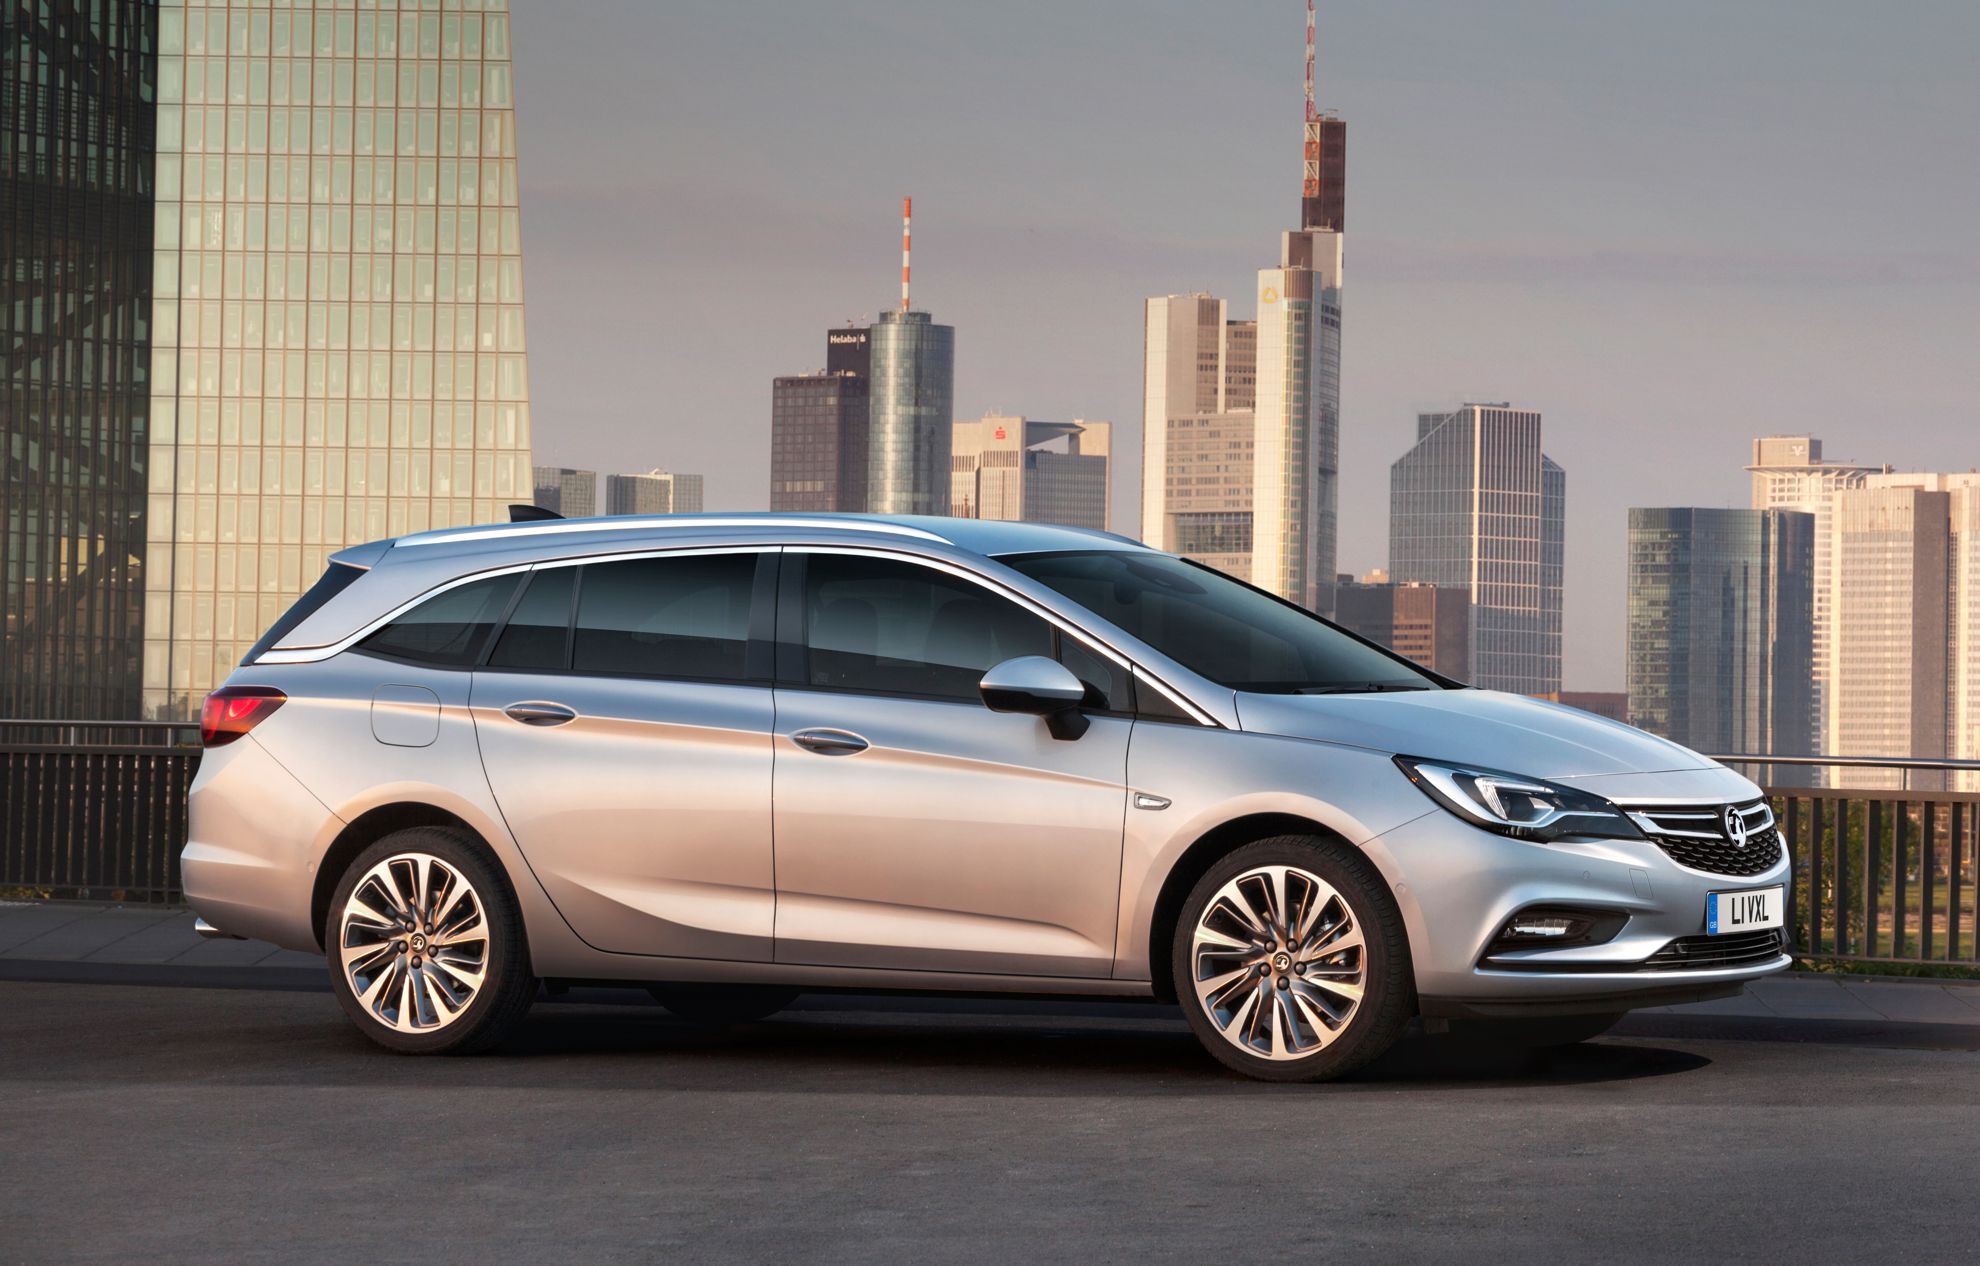 Vauxhall Astra Sports Tourer is to make its debut at the 2015 Frankfurt Motor Show